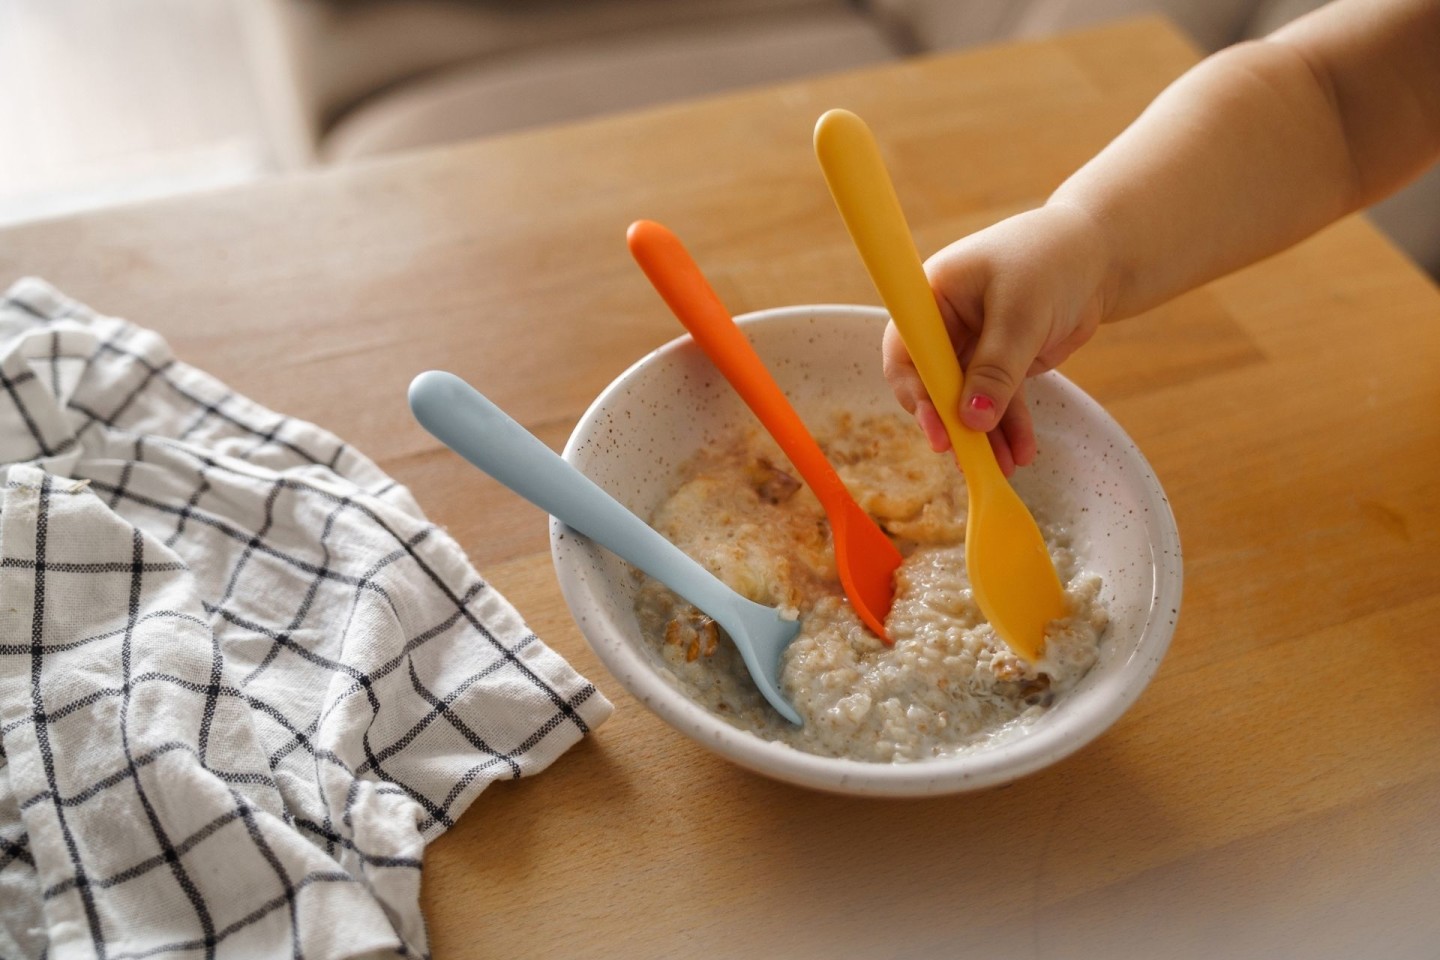 Baby hand reaching for a spoon in a bowl of oatmeal